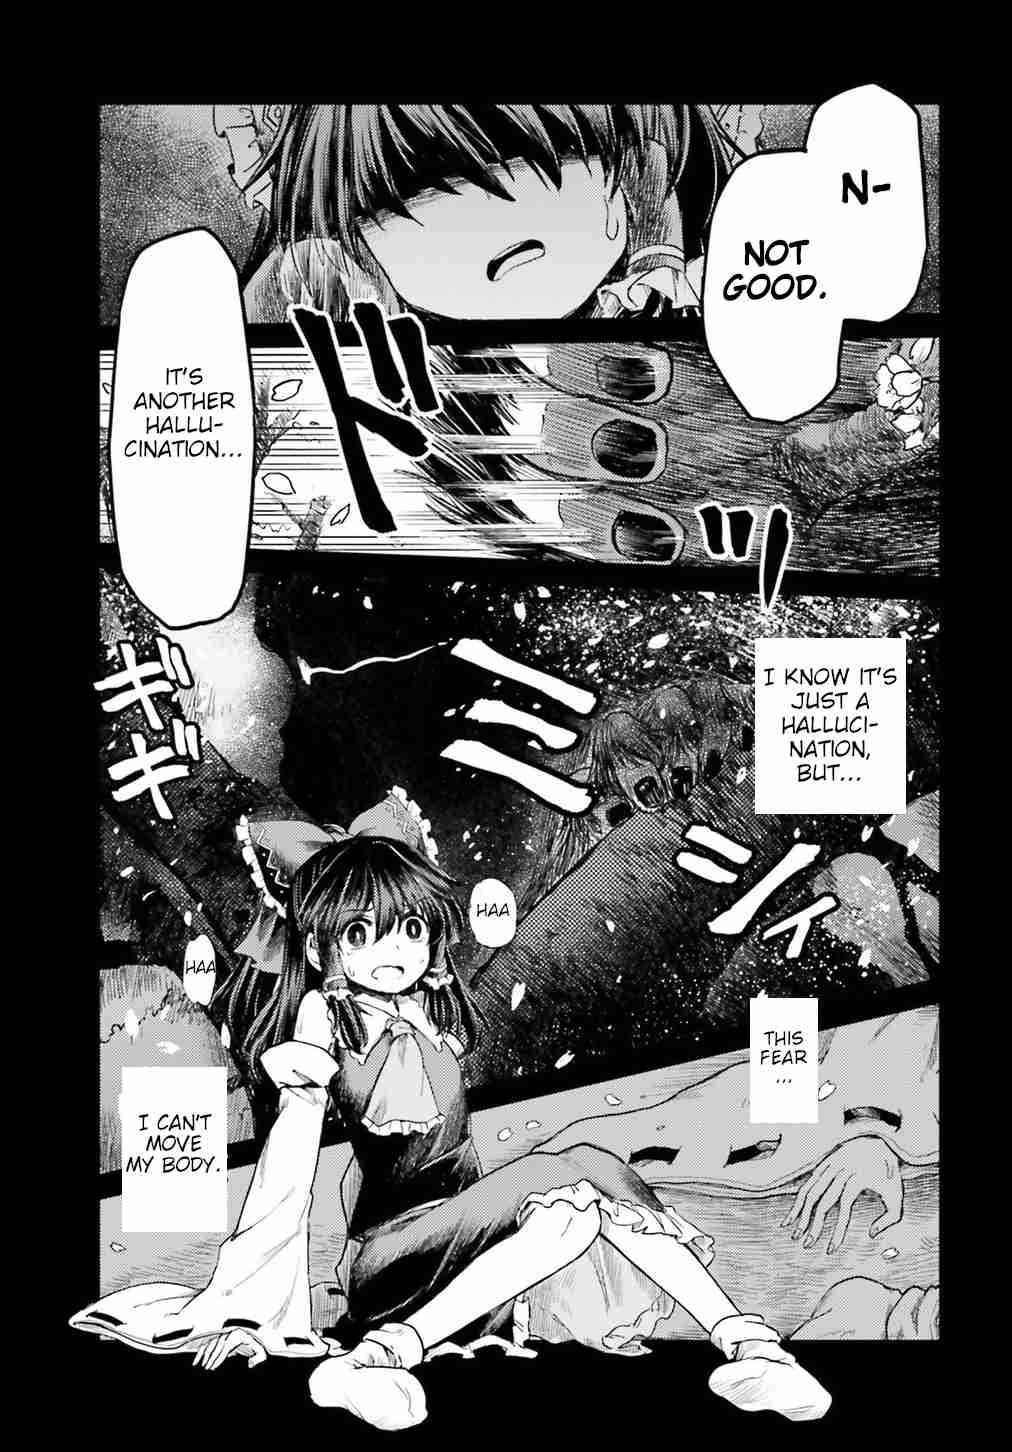 Touhou Suichouka ~ Lotus Eater tachi no Suisei Vol. 1 Ch. 4 The Haughty Grab Even the Red Ape (Part 1)